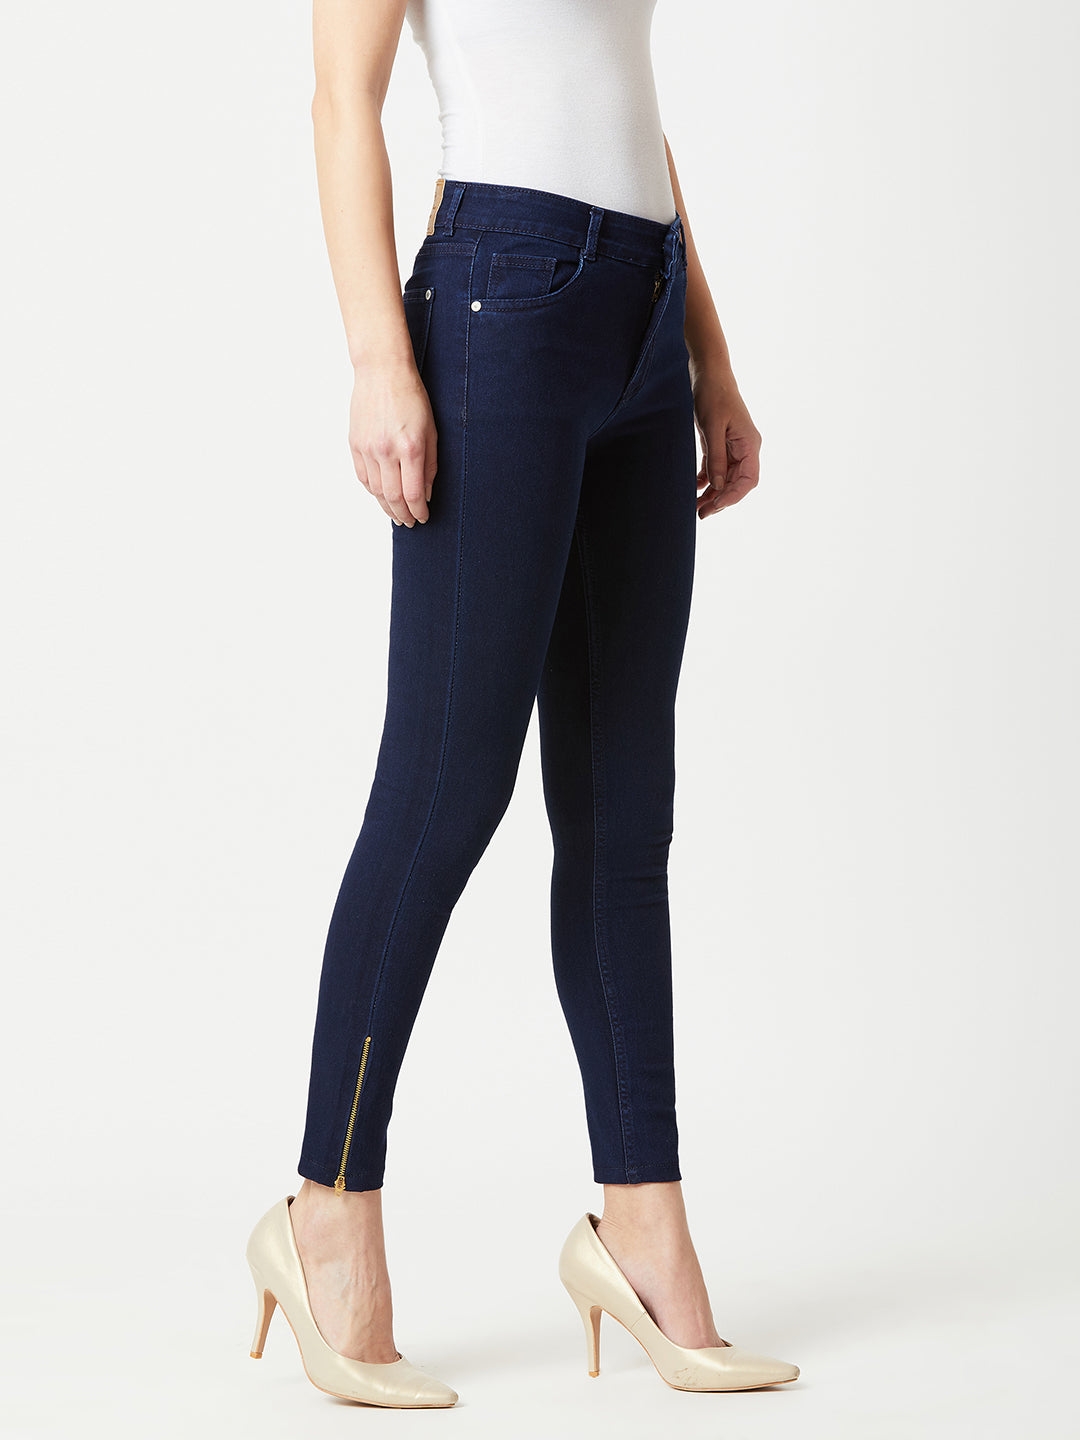 Navy Blue Skinny Fit Mid Rise Cropped Length Zipper Detailing Denim Stretchable Jeans